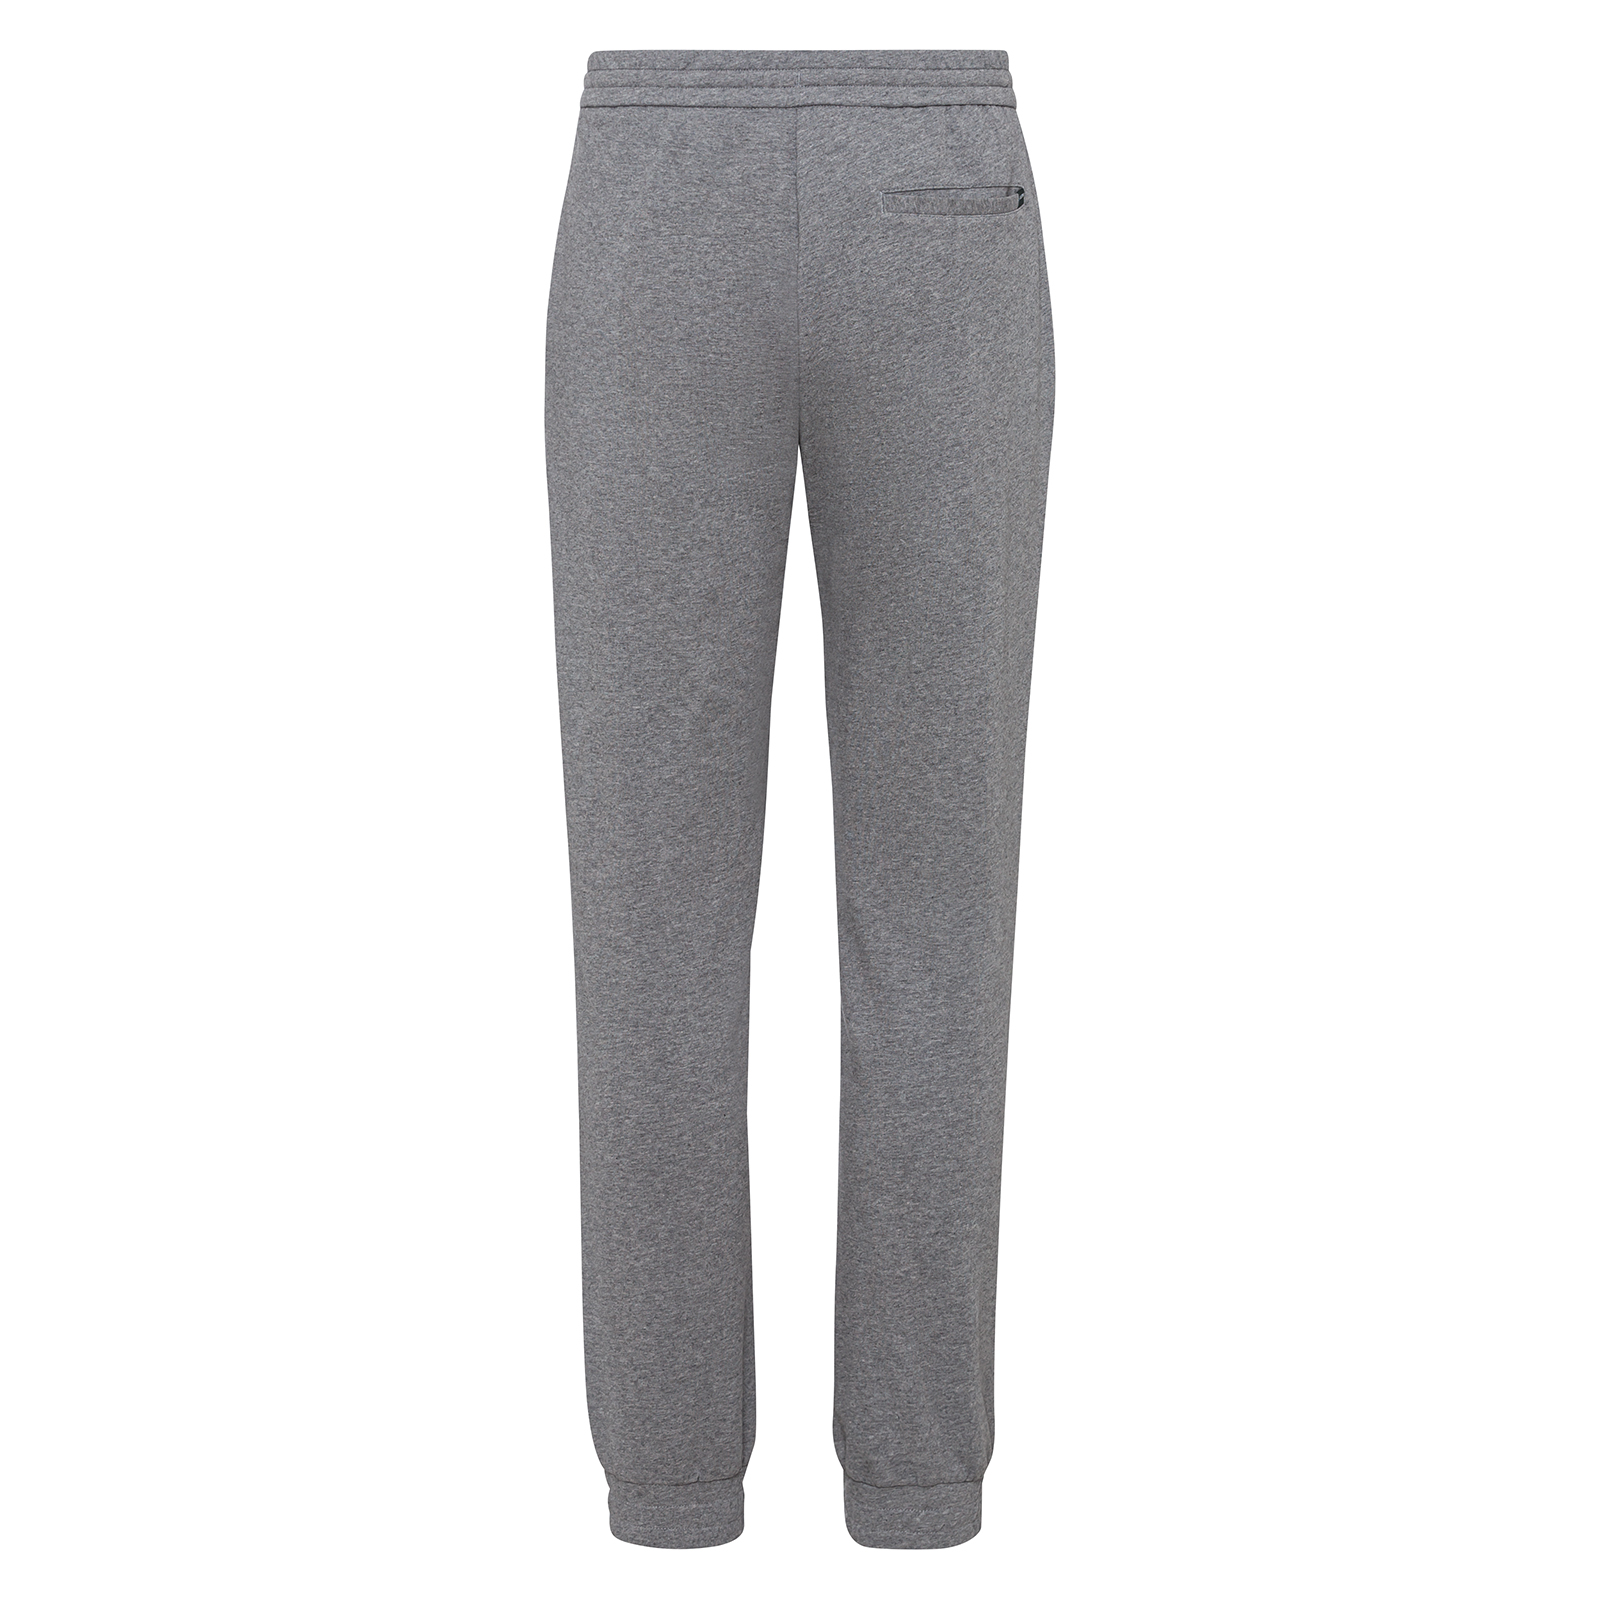 Casual men's trousers made from particularly comfortable cotton fabric